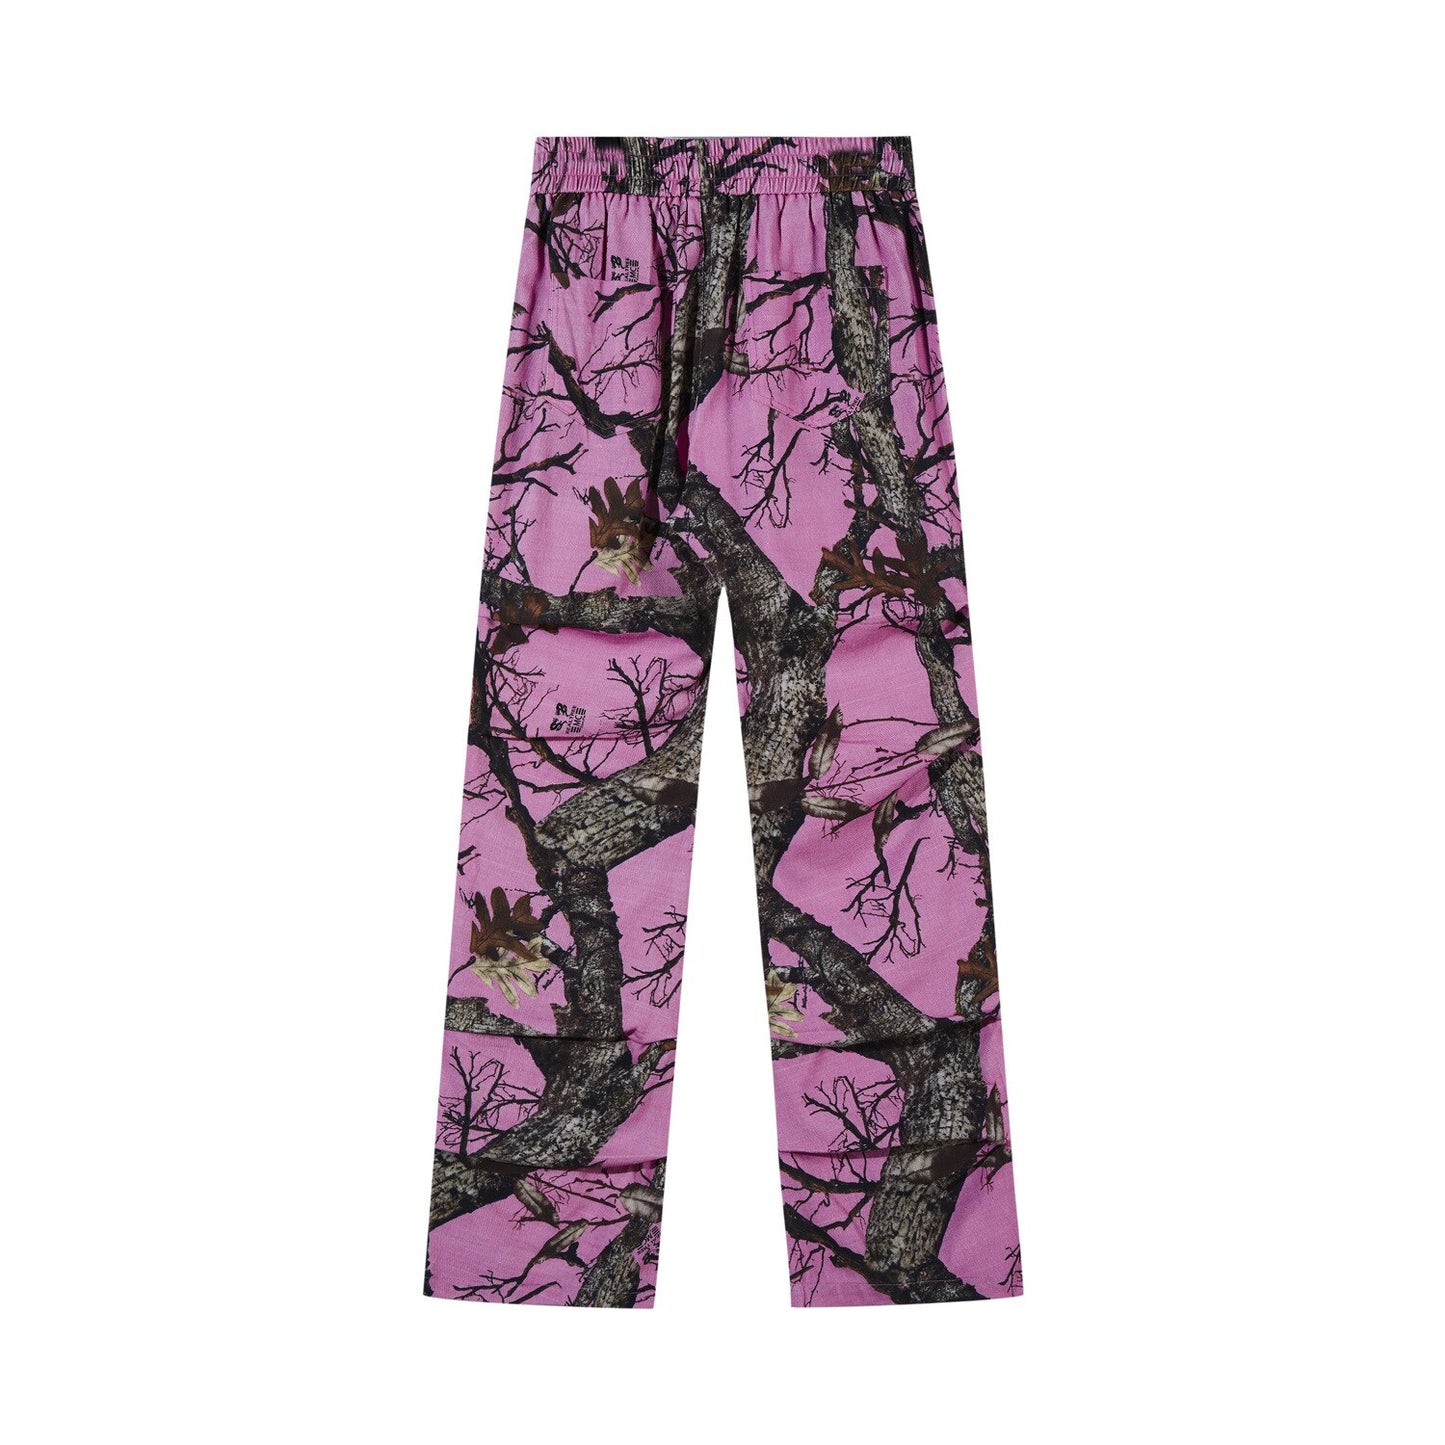 MADE EXTREME Pink Camouflage Pant